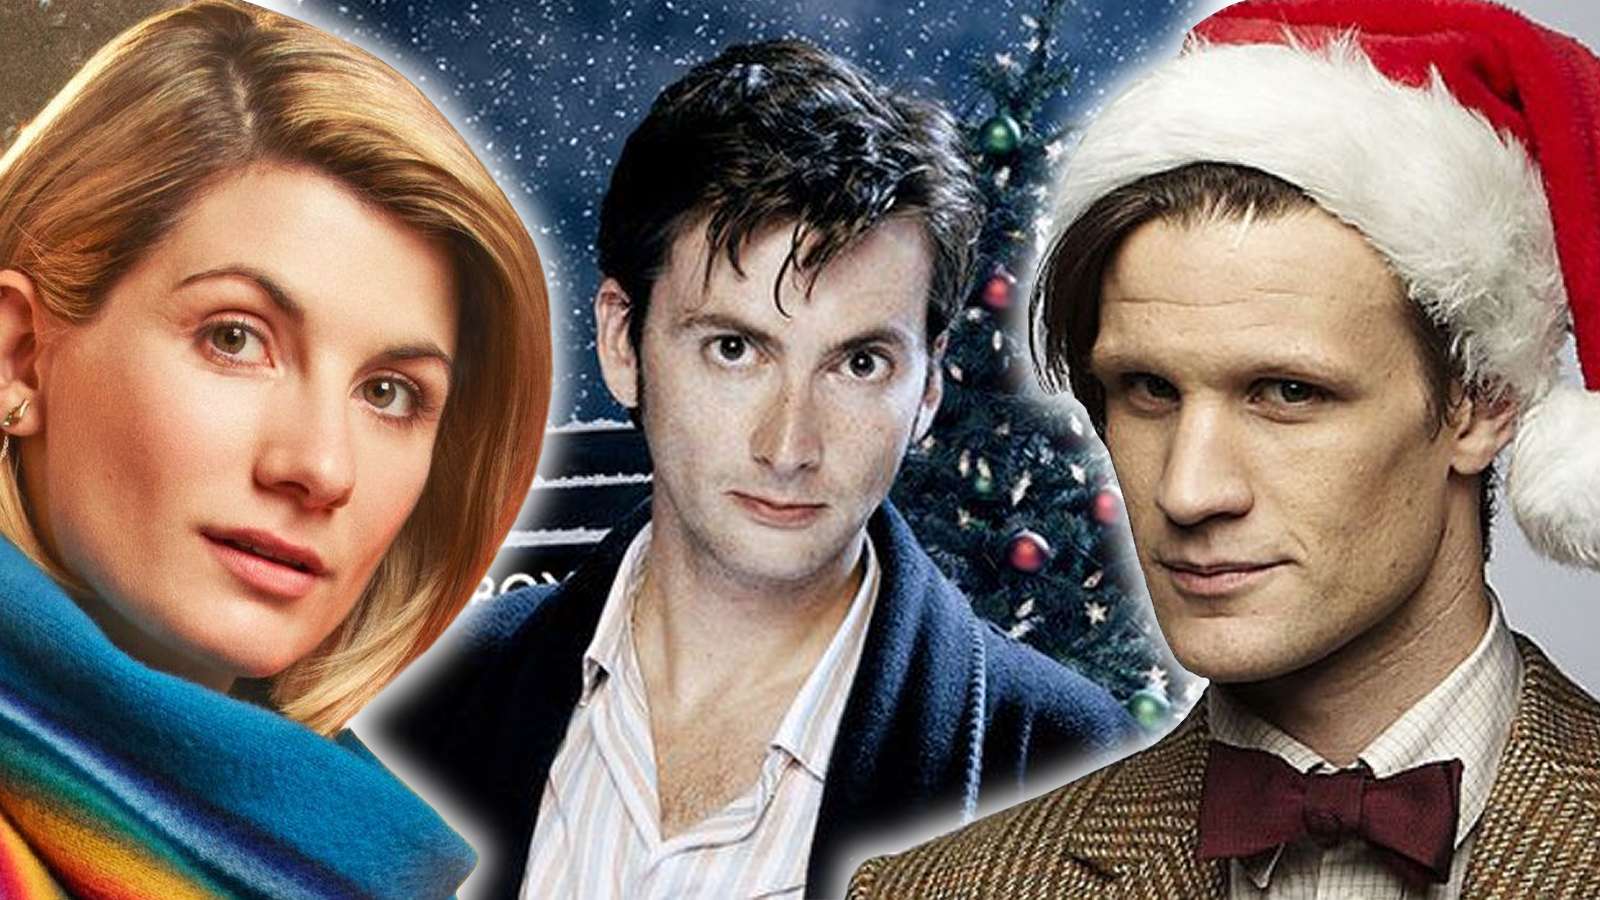 A montage of Doctor Who Christmas special poster artwork